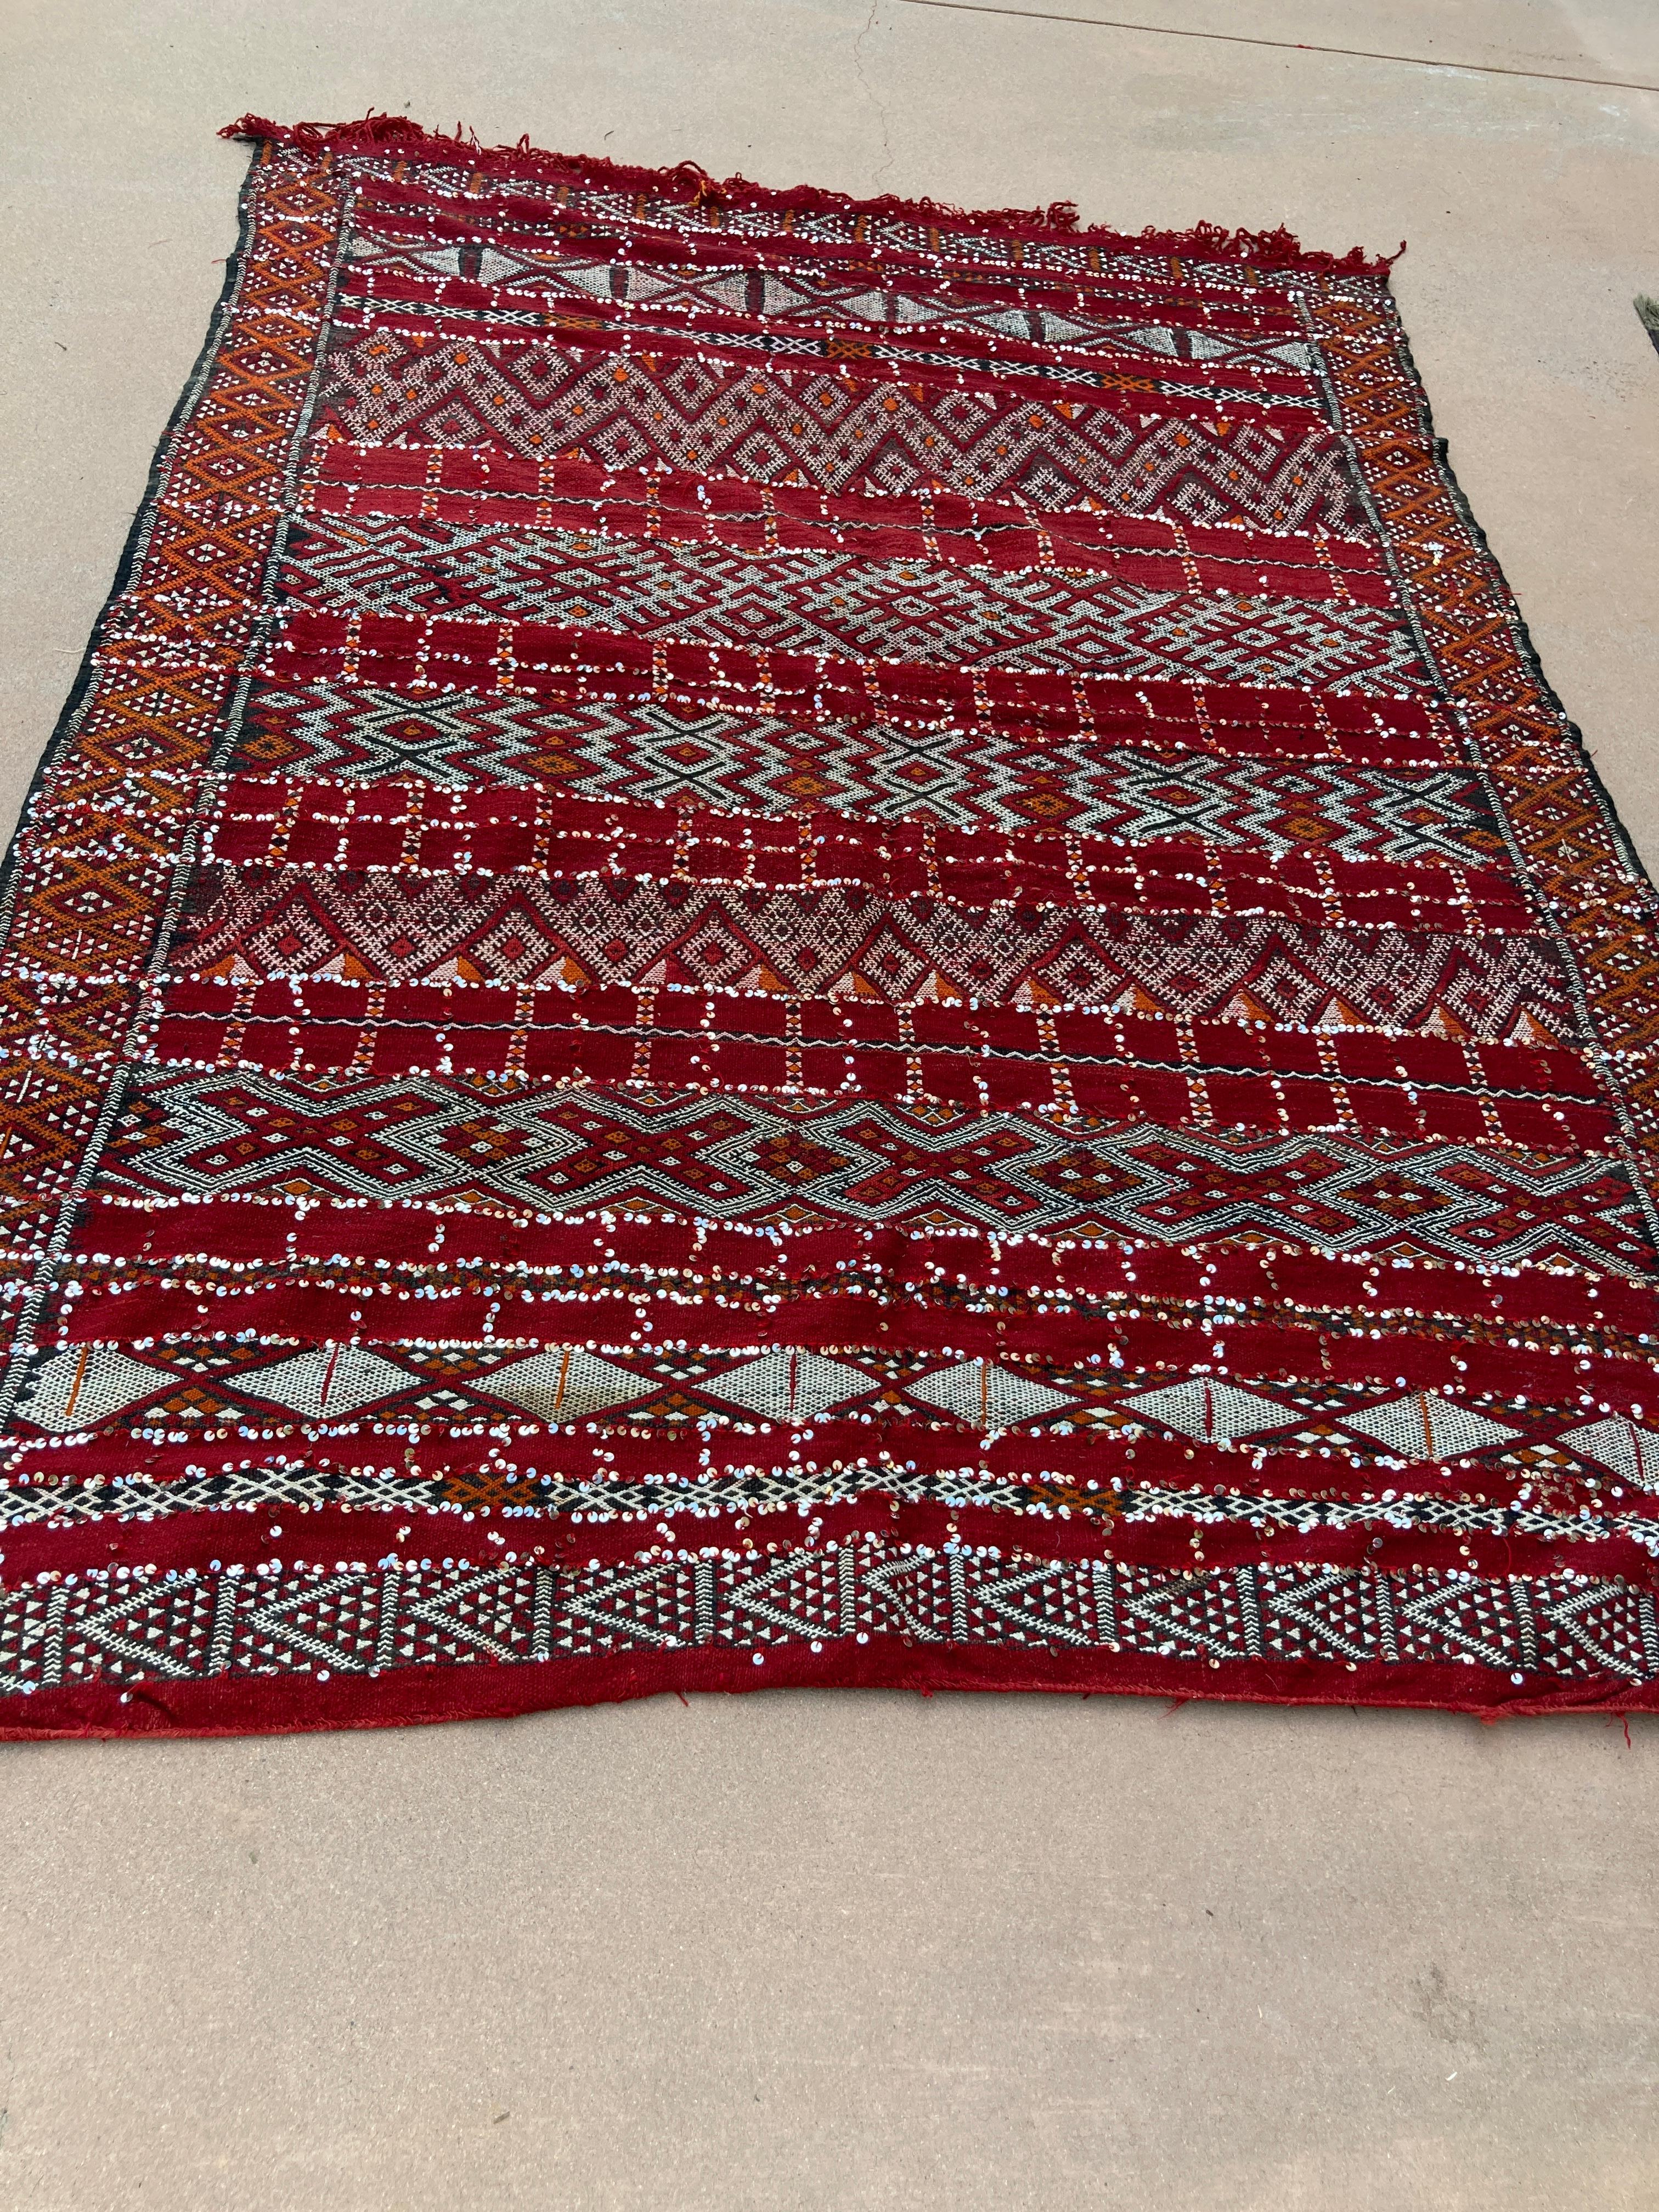 Moroccan tribal wedding rug with sequins North Africa, Handira.
Handwoven vintage Moroccan Berber Tribal Handira ethnic textile.
Moroccan Bohemian style rug, handwoven by the Berber women of the Zemmour tribe for their wedding day.
The design on